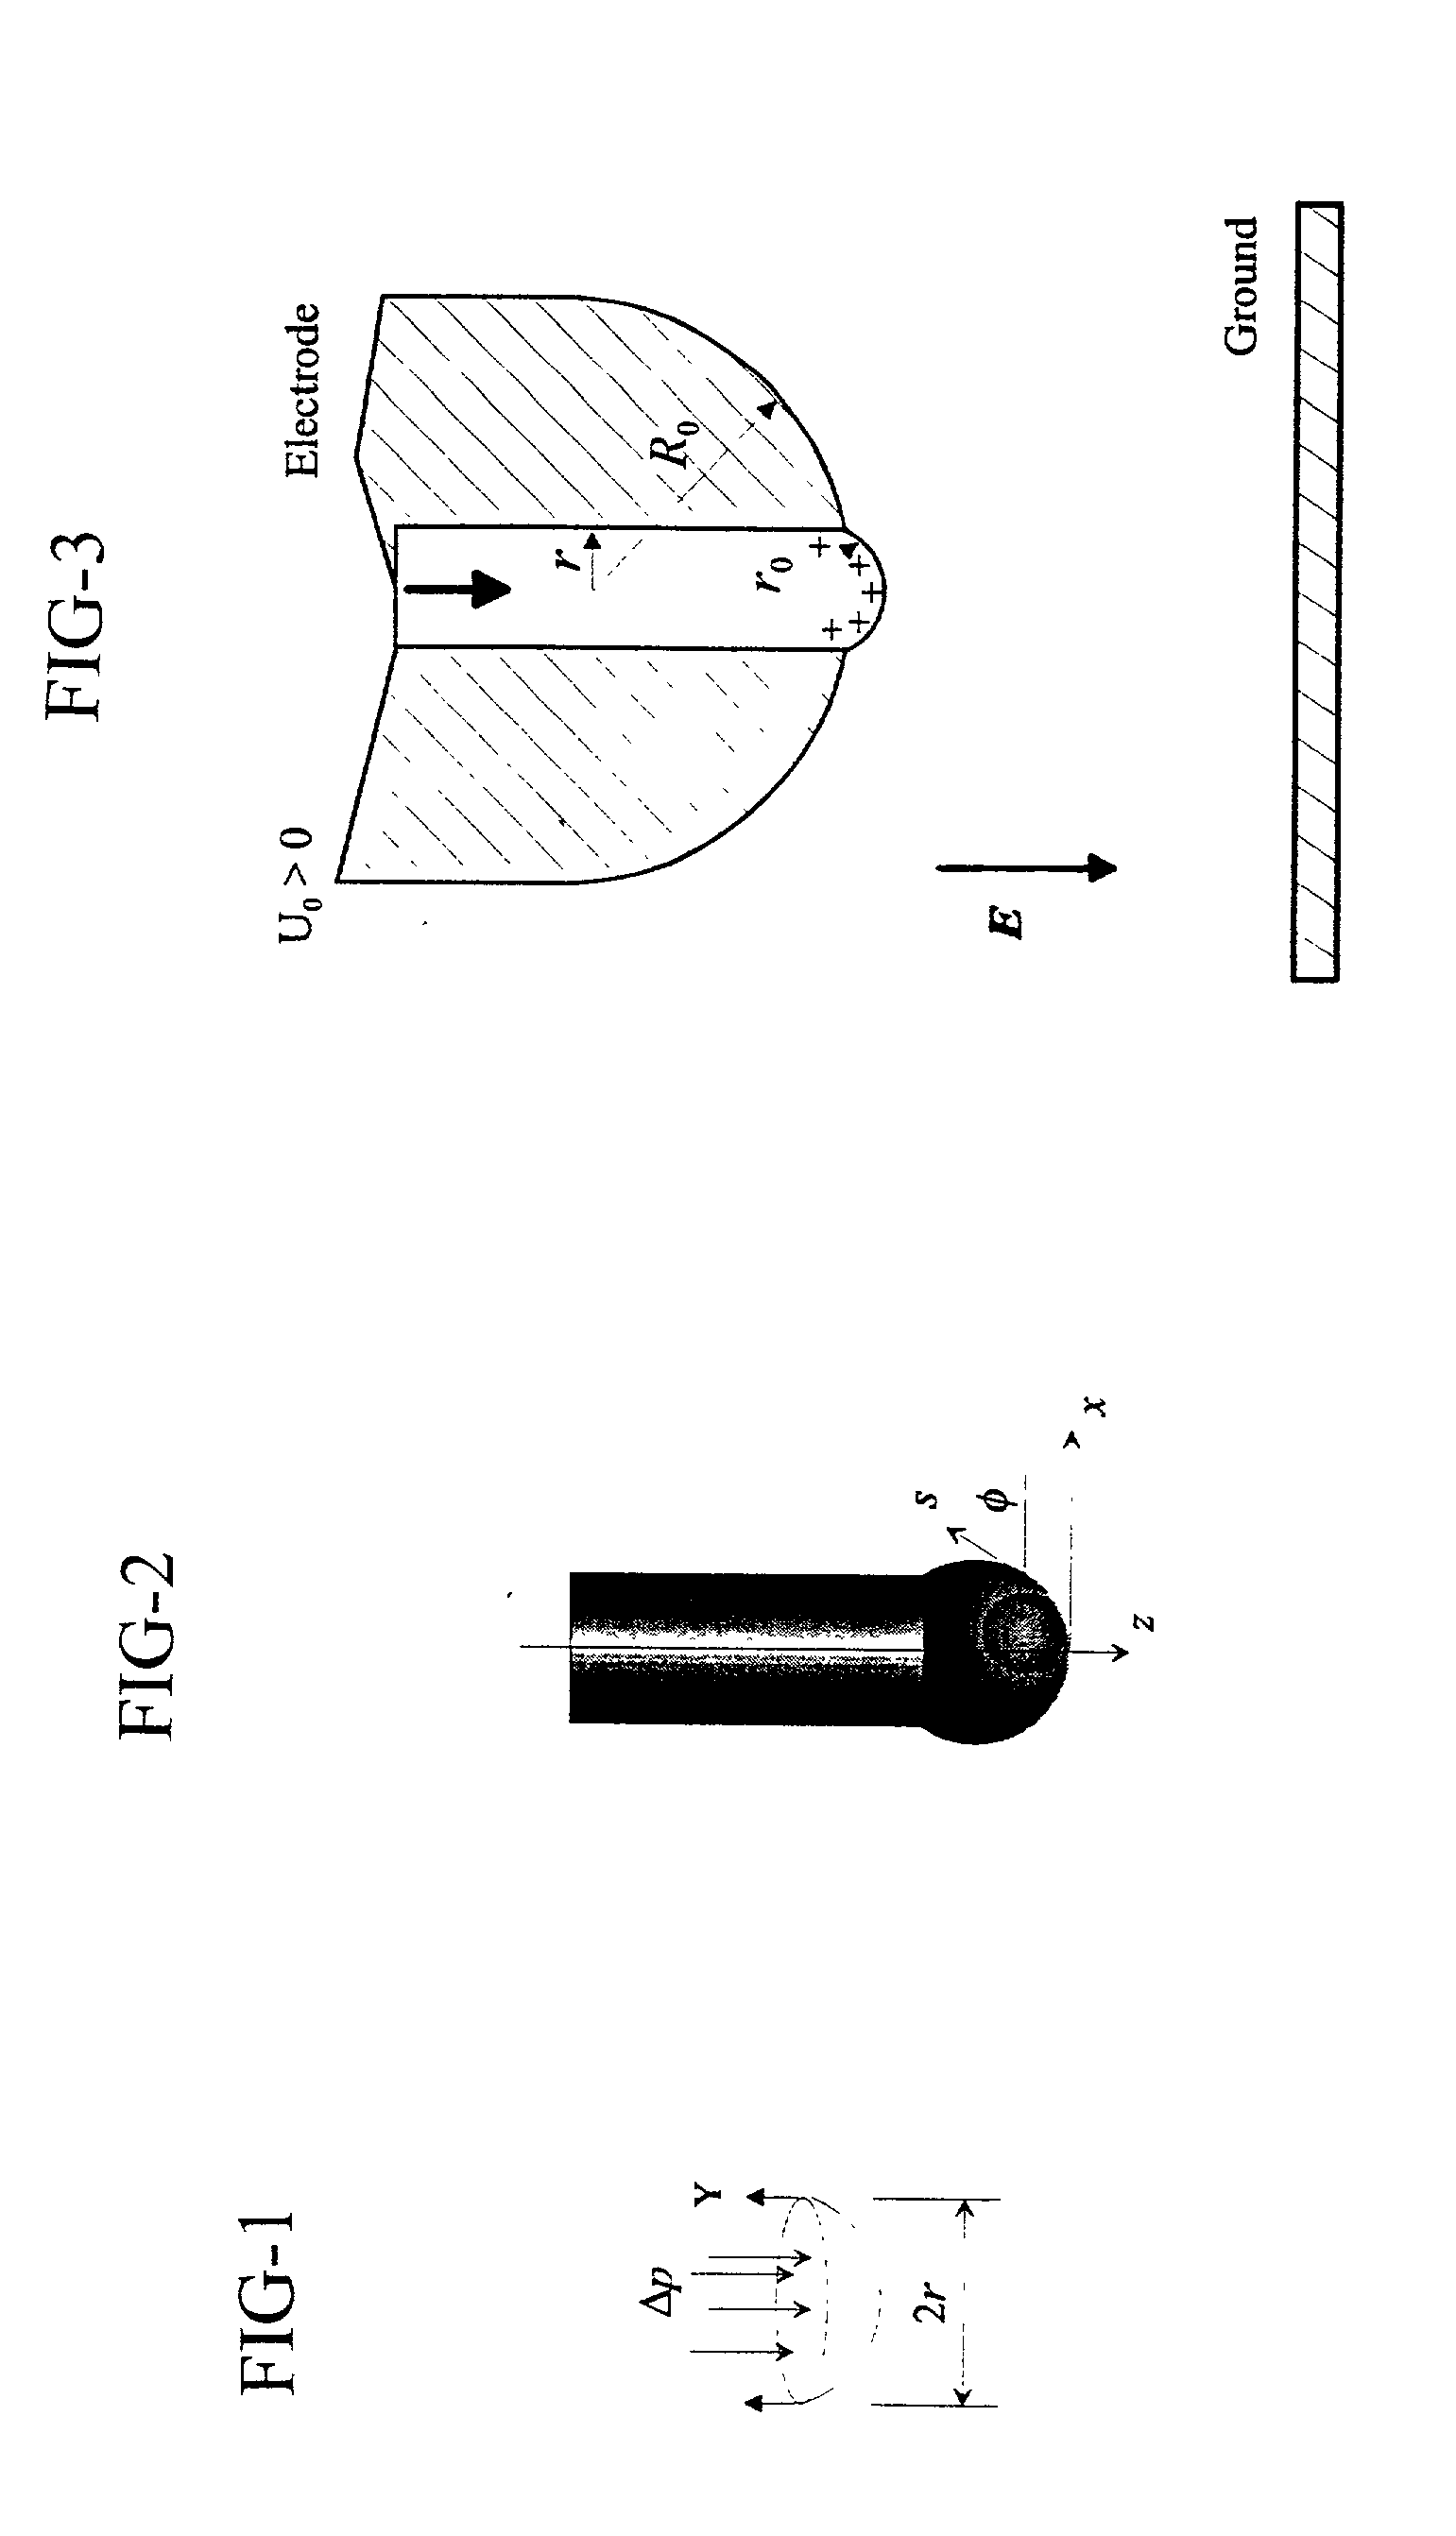 Apparatus and methods for electrospinning polymeric fibers and membranes